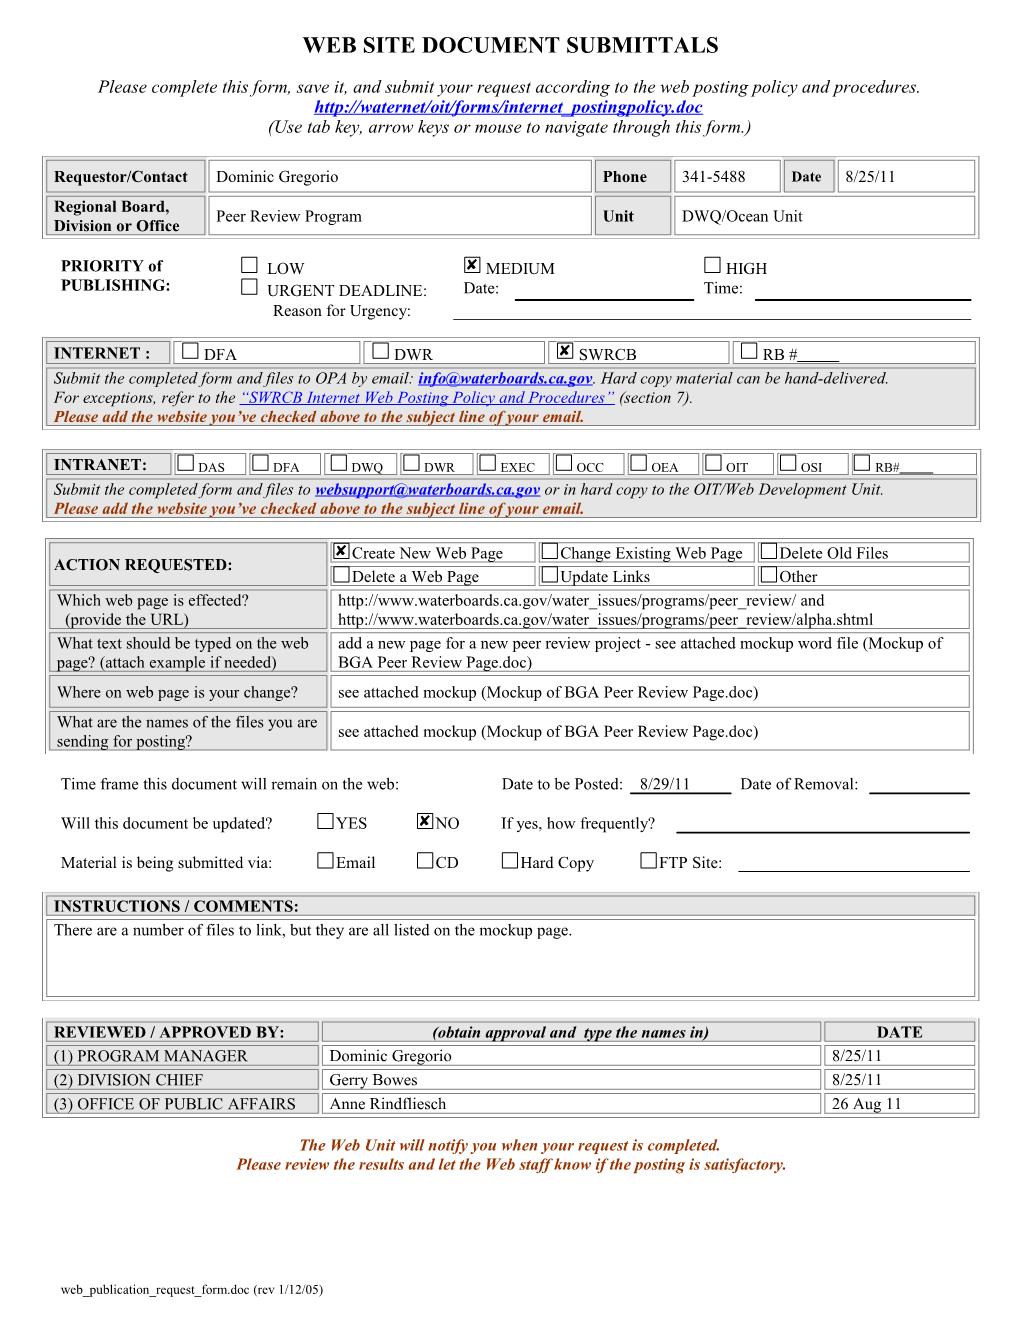 WEB SITE DOCUMENT SUBMITTALS (Form)